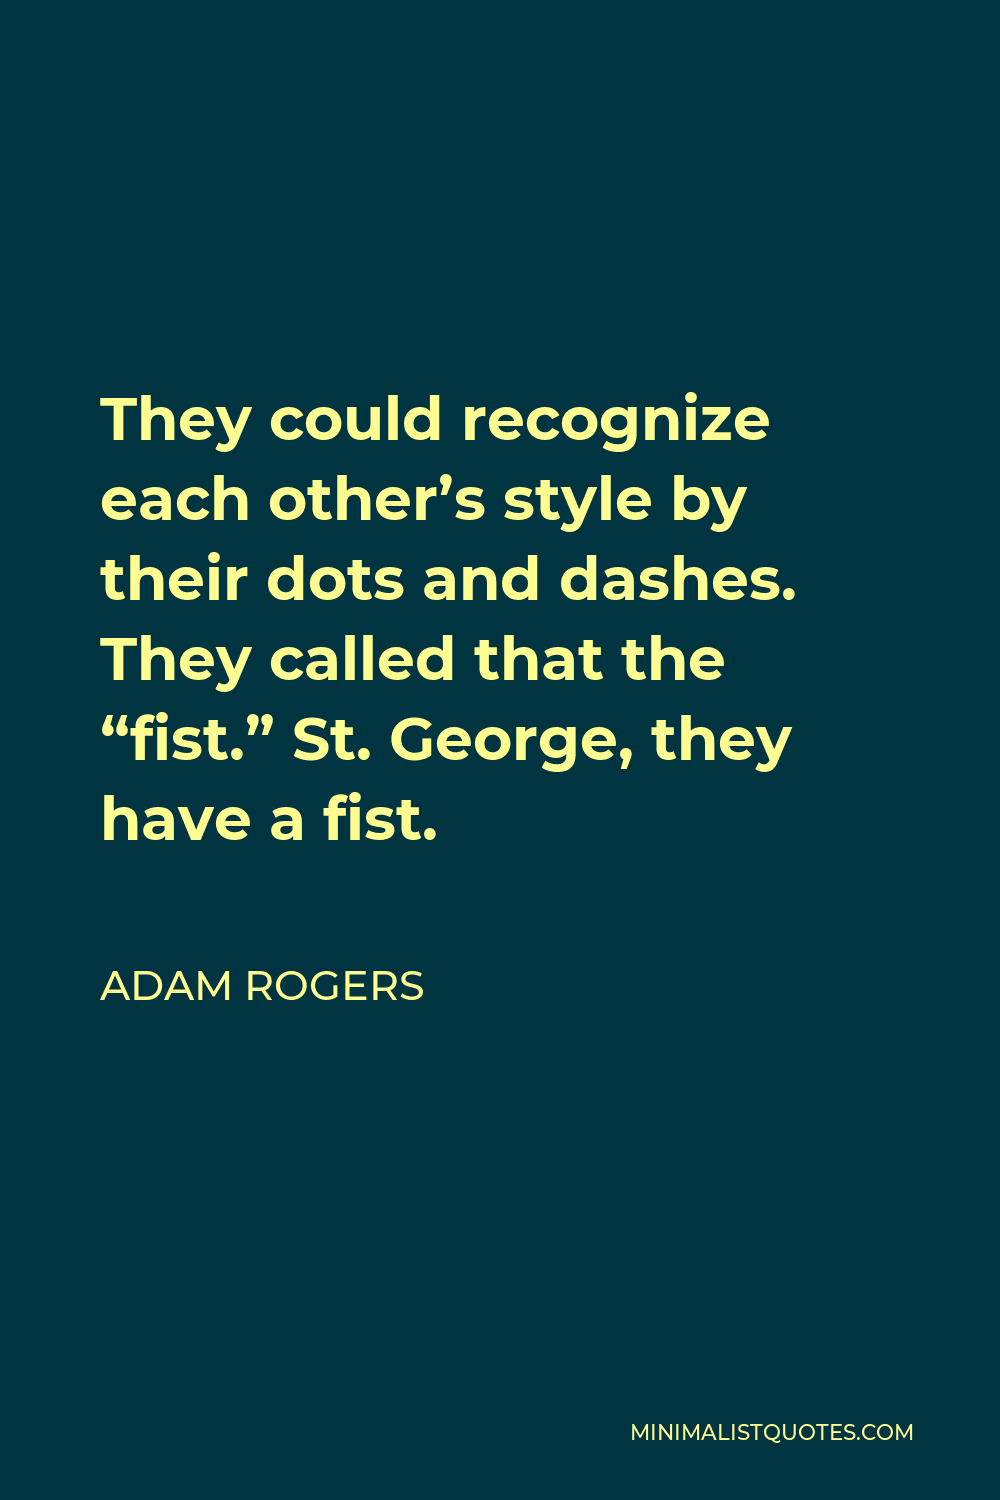 Adam Rogers Quote - They could recognize each other’s style by their dots and dashes. They called that the “fist.” St. George, they have a fist.